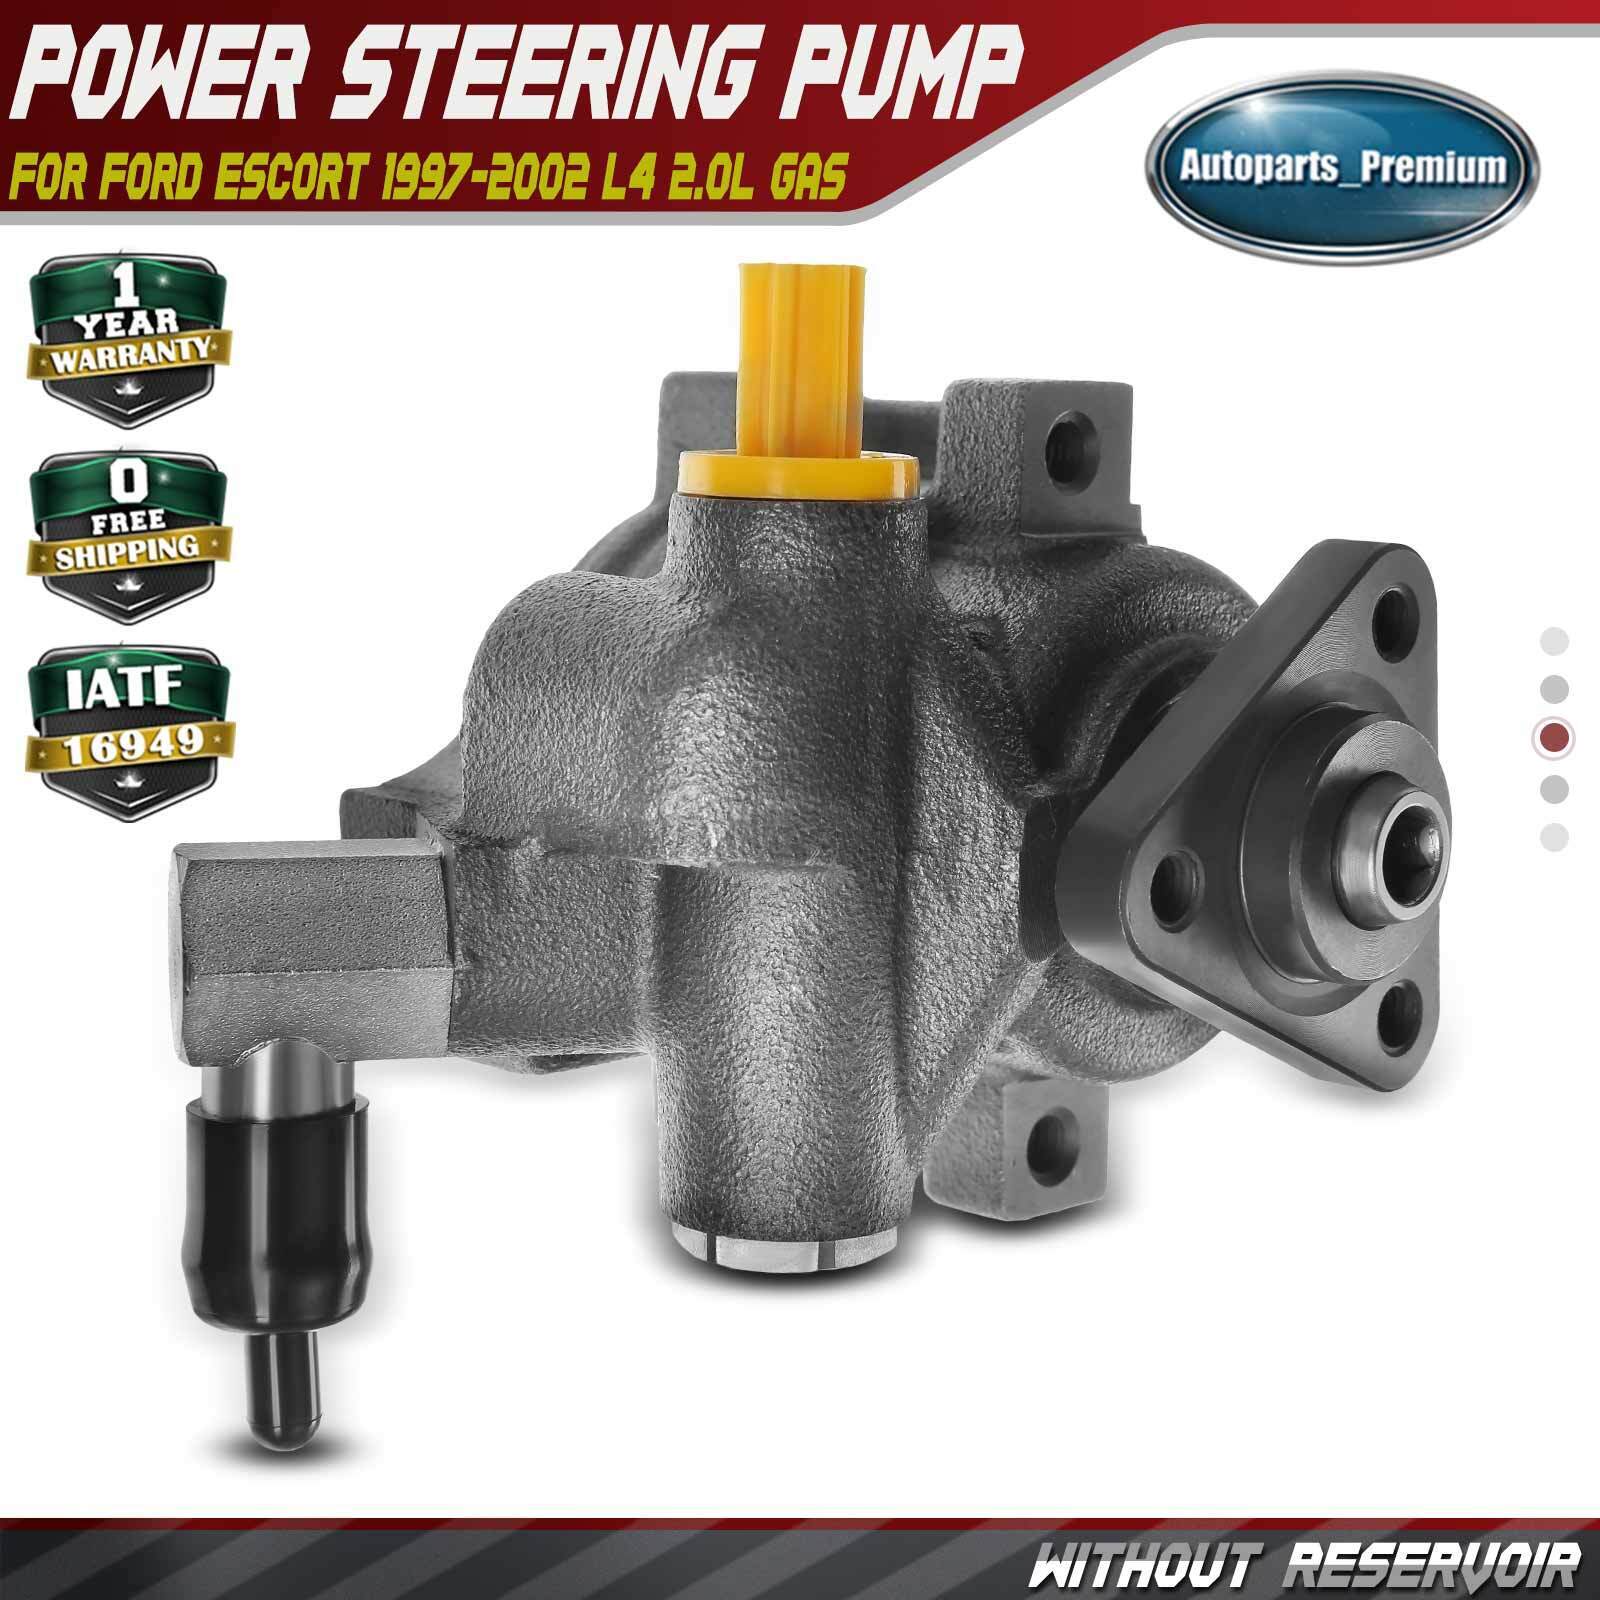 Power Steering Pump for Ford Escort 1997 1998 1999 2000 2001 2002 L4 2.0L Gas